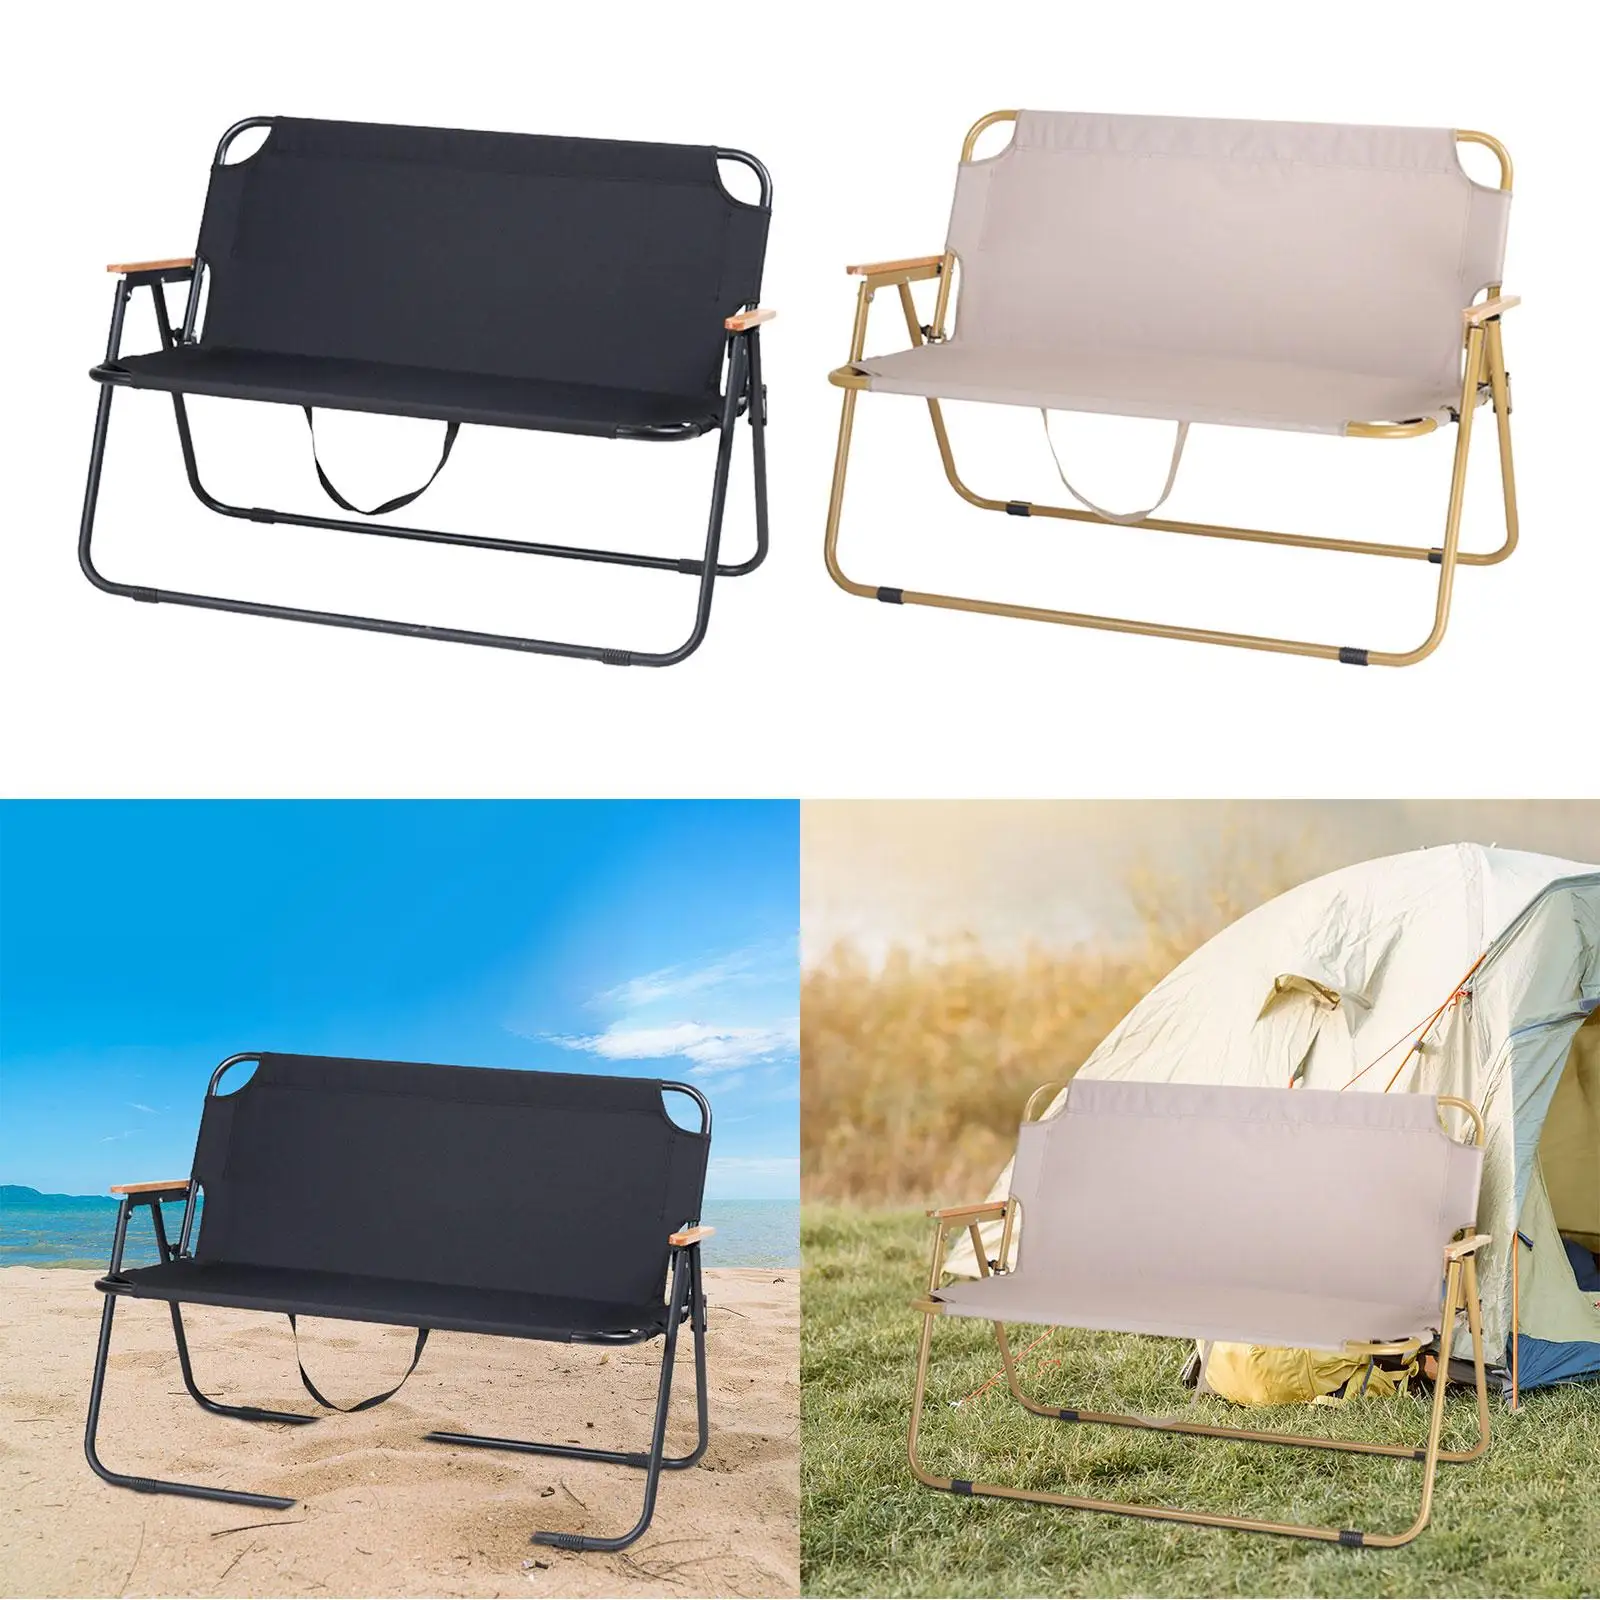 Folding Camping Chair Outside Camping Stool Chair Outdoor Traveling Double Chair Fishing Adult Backpacking Patio Beach Chair